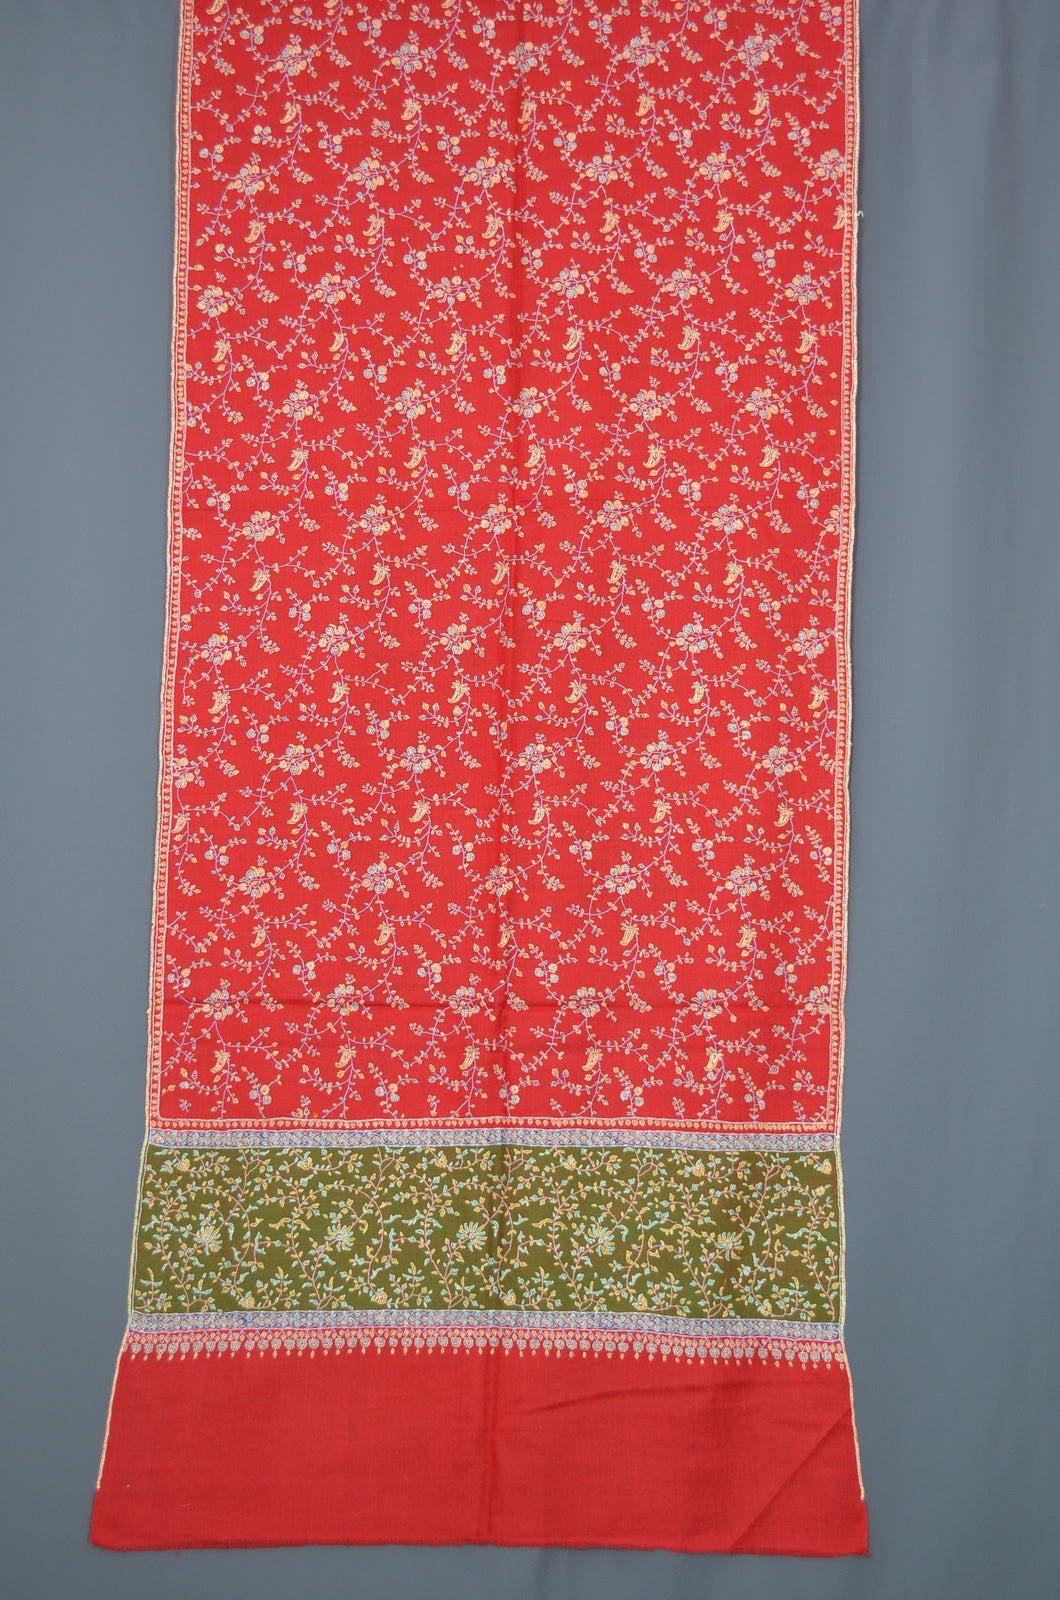 Red Jali Embroidery Cashmere Pashmina Scarf